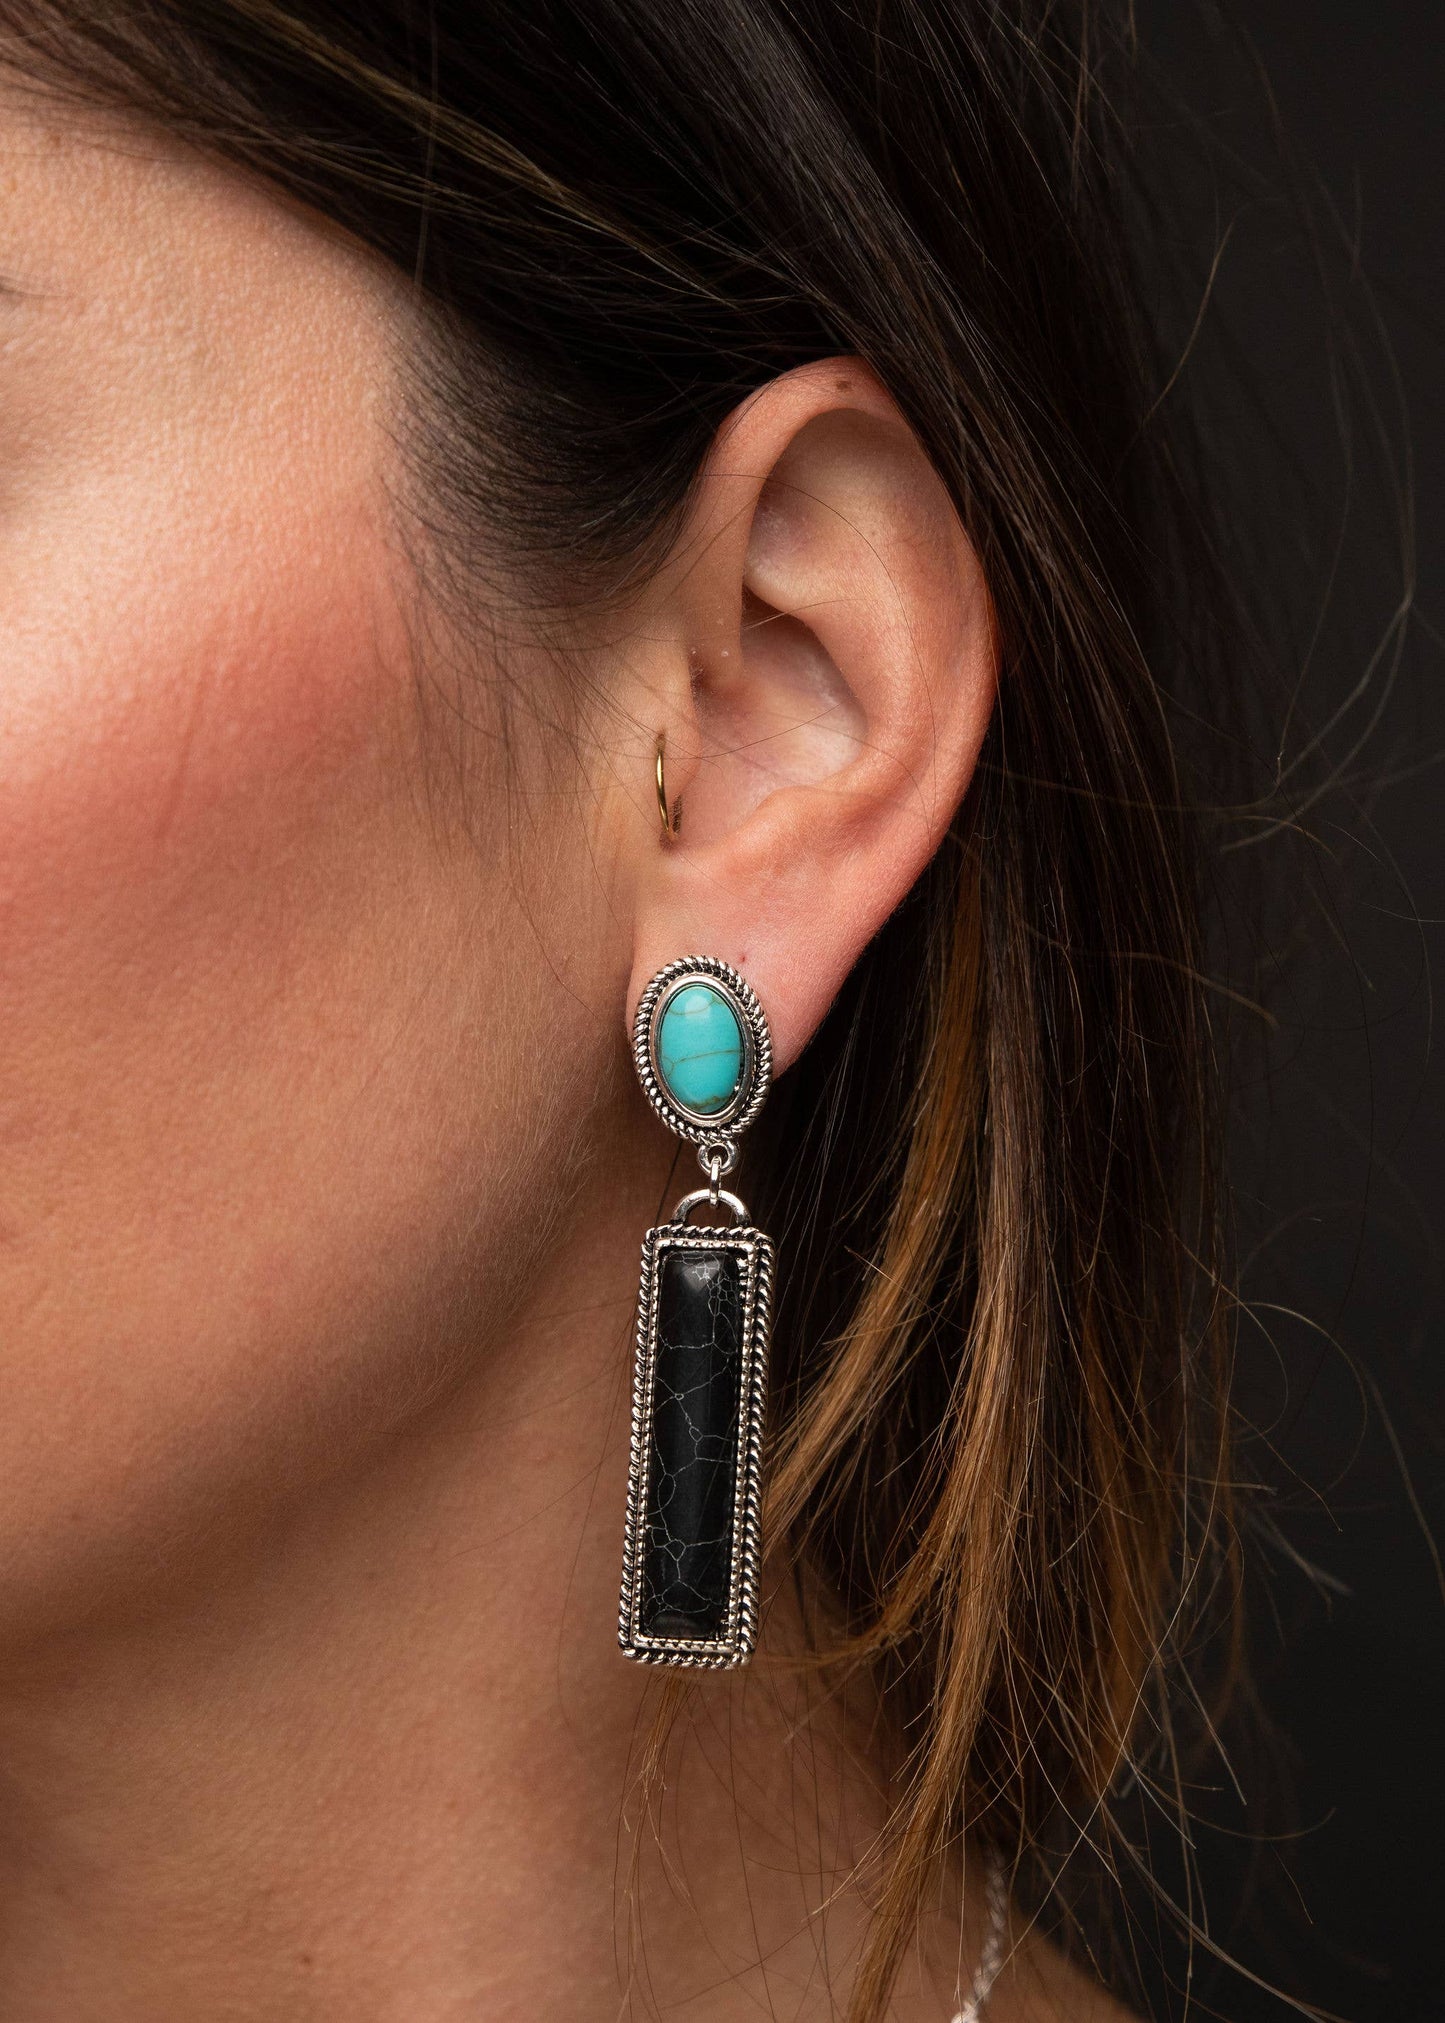 West & Co. - 2.5" Black Bar Earring on Turquoise Post